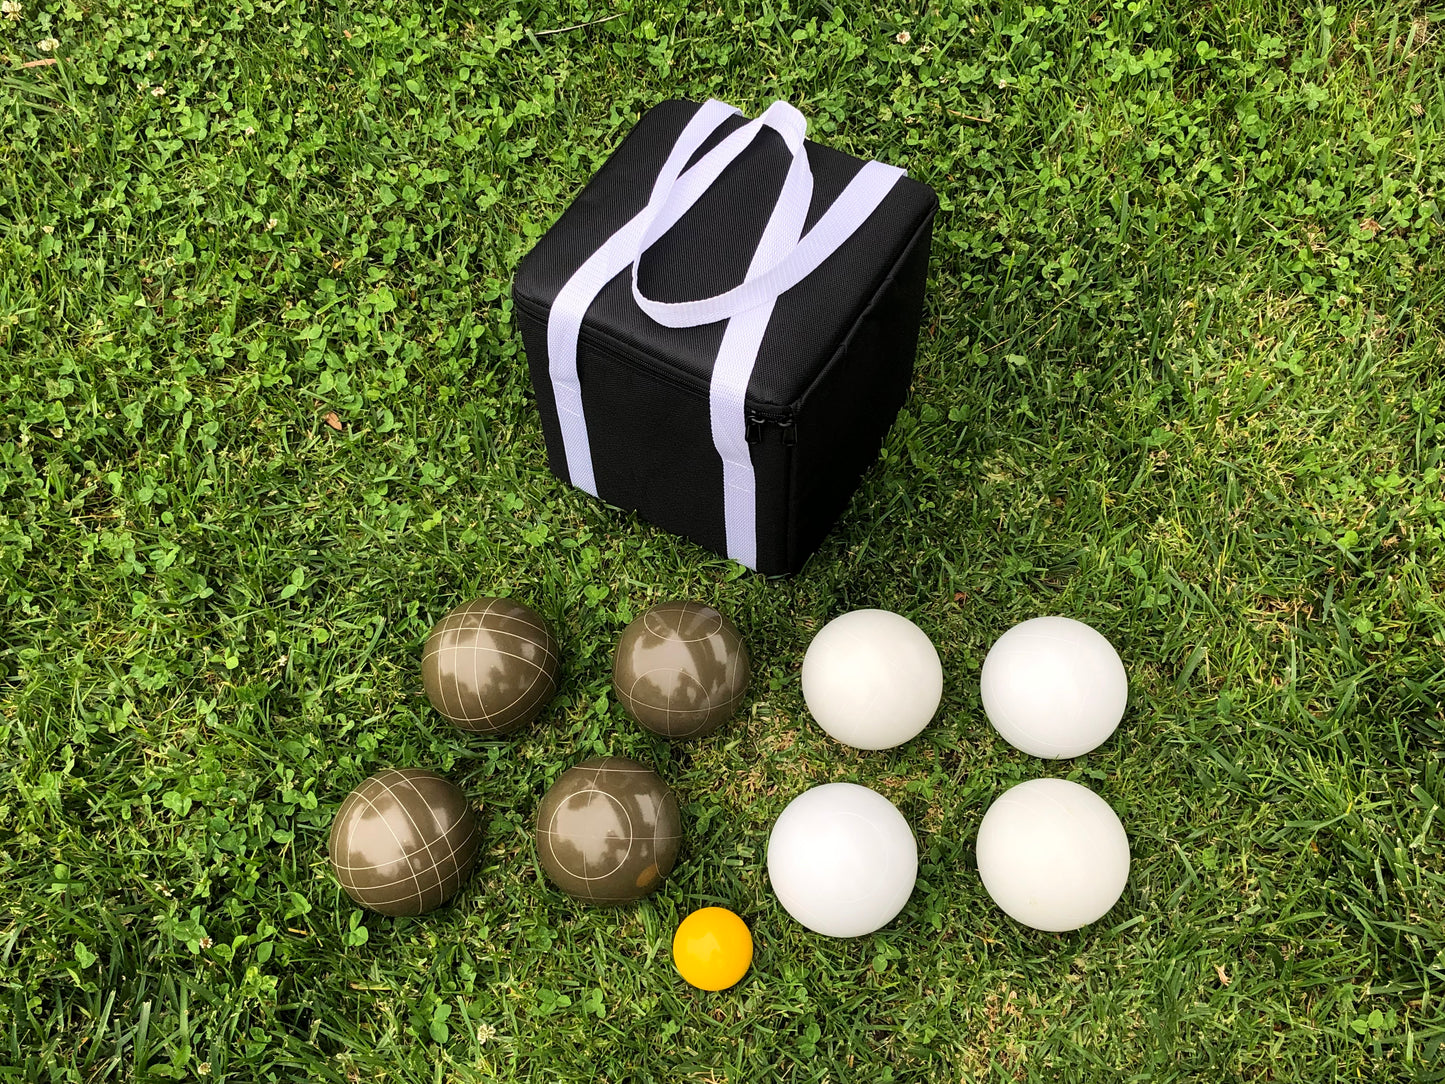 107mm Bocce Olive Brown and White Balls with Black Bag